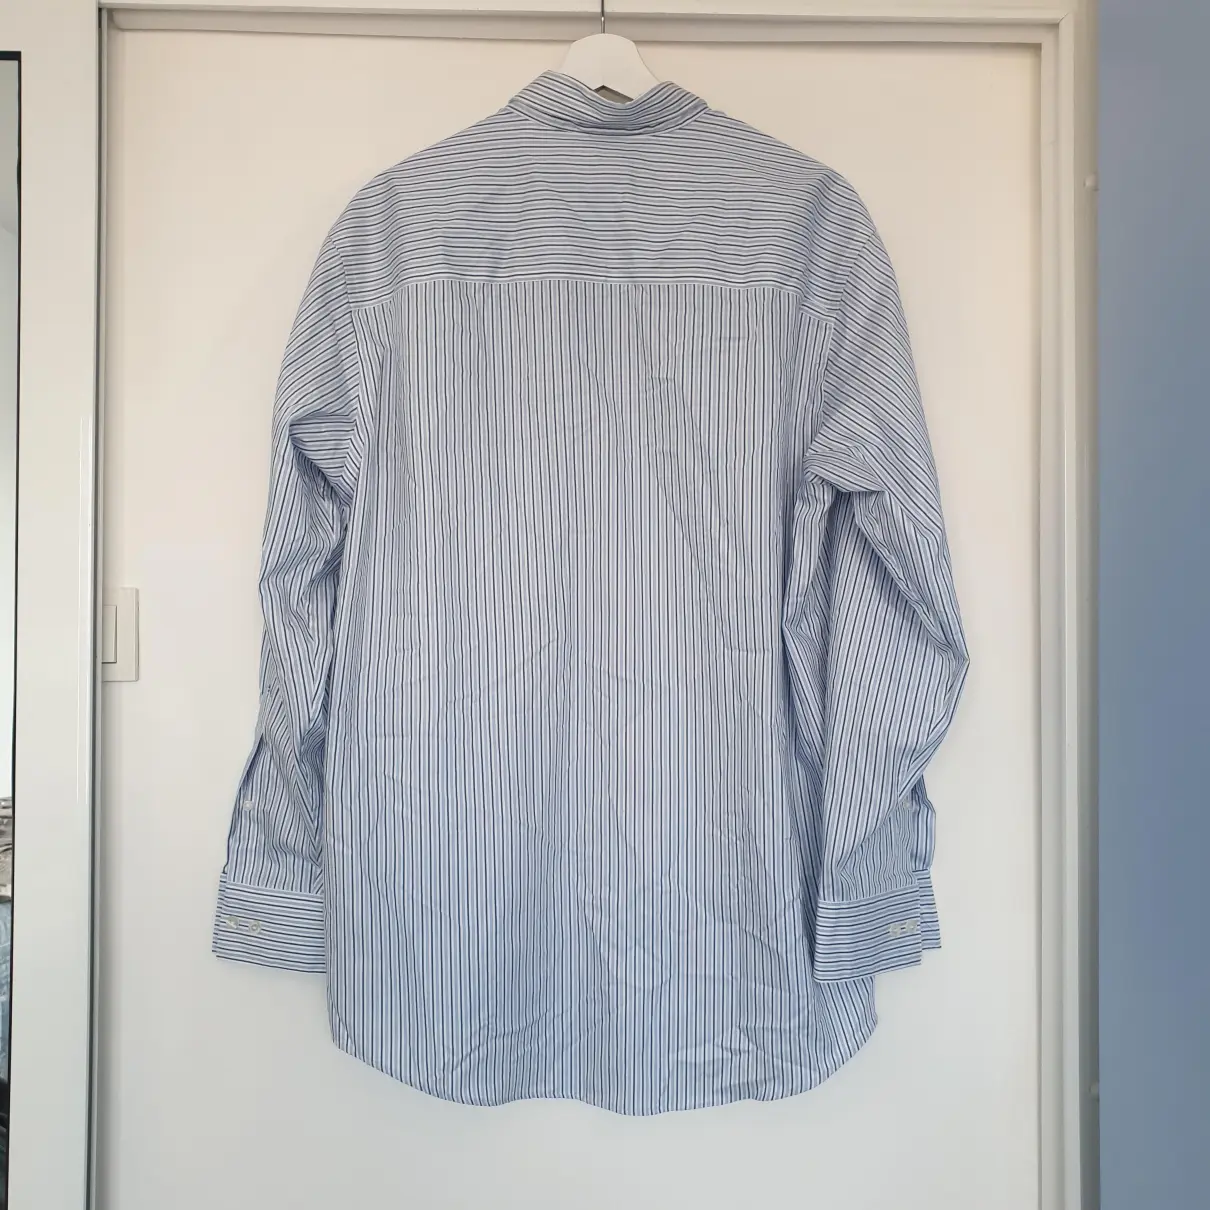 Buy Kenneth Cole Shirt online